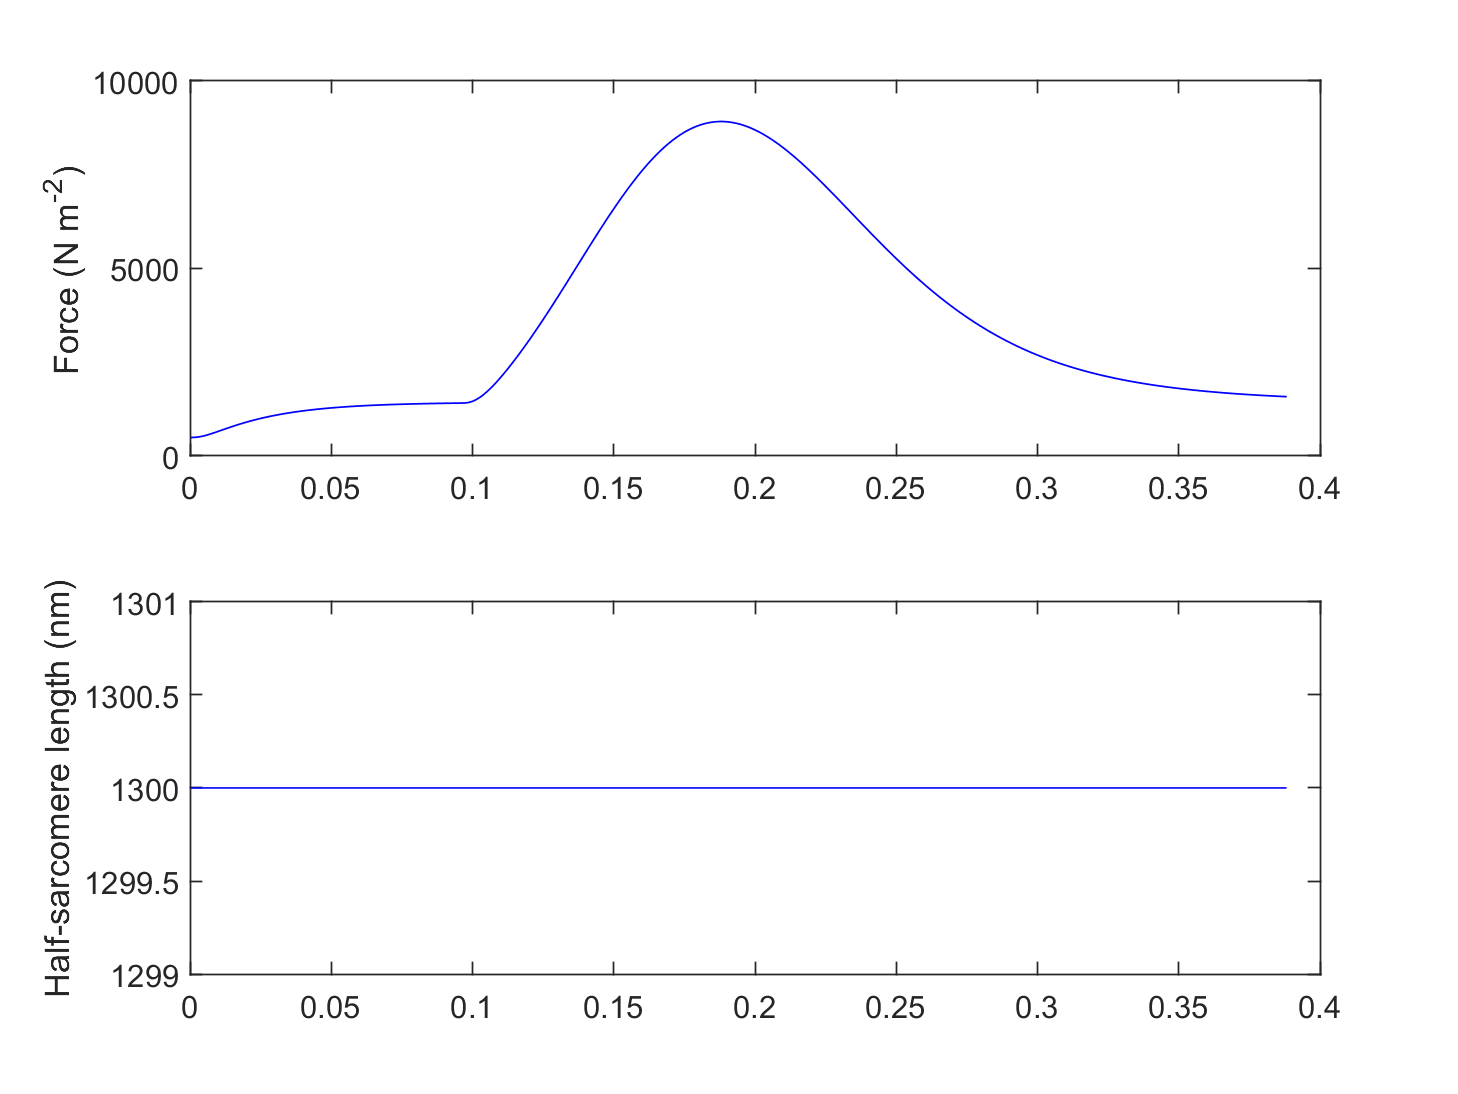 Replotted output